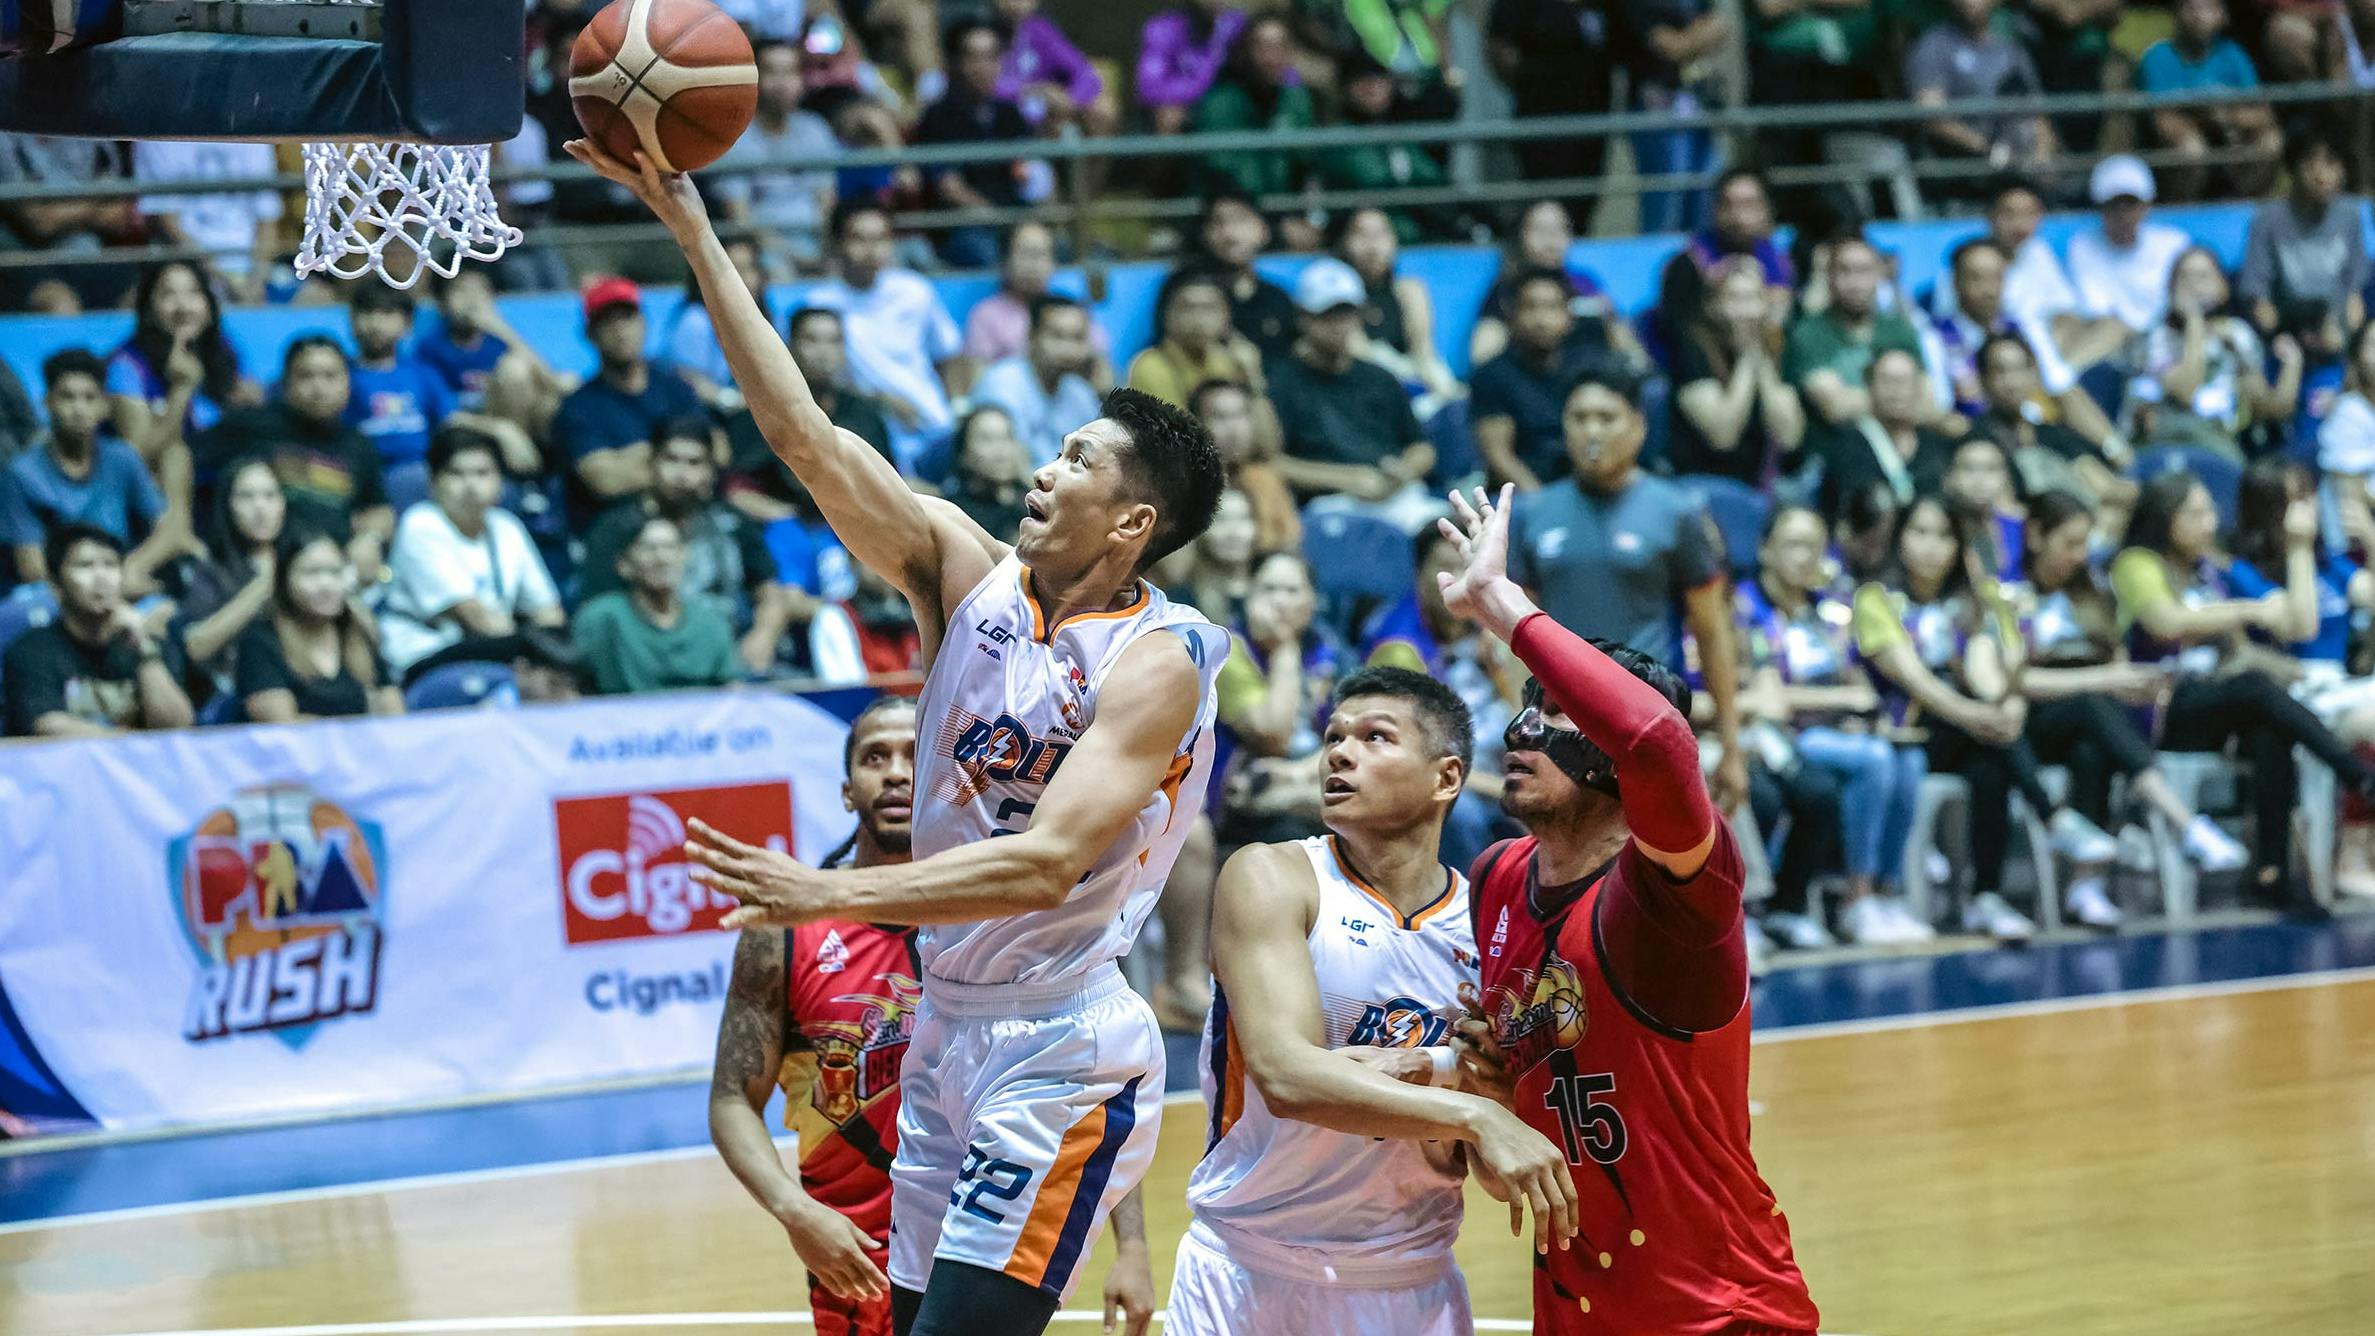 PBA: Allein Maliksi, Meralco deny San Miguel of elims sweep to clinch quarterfinal berth